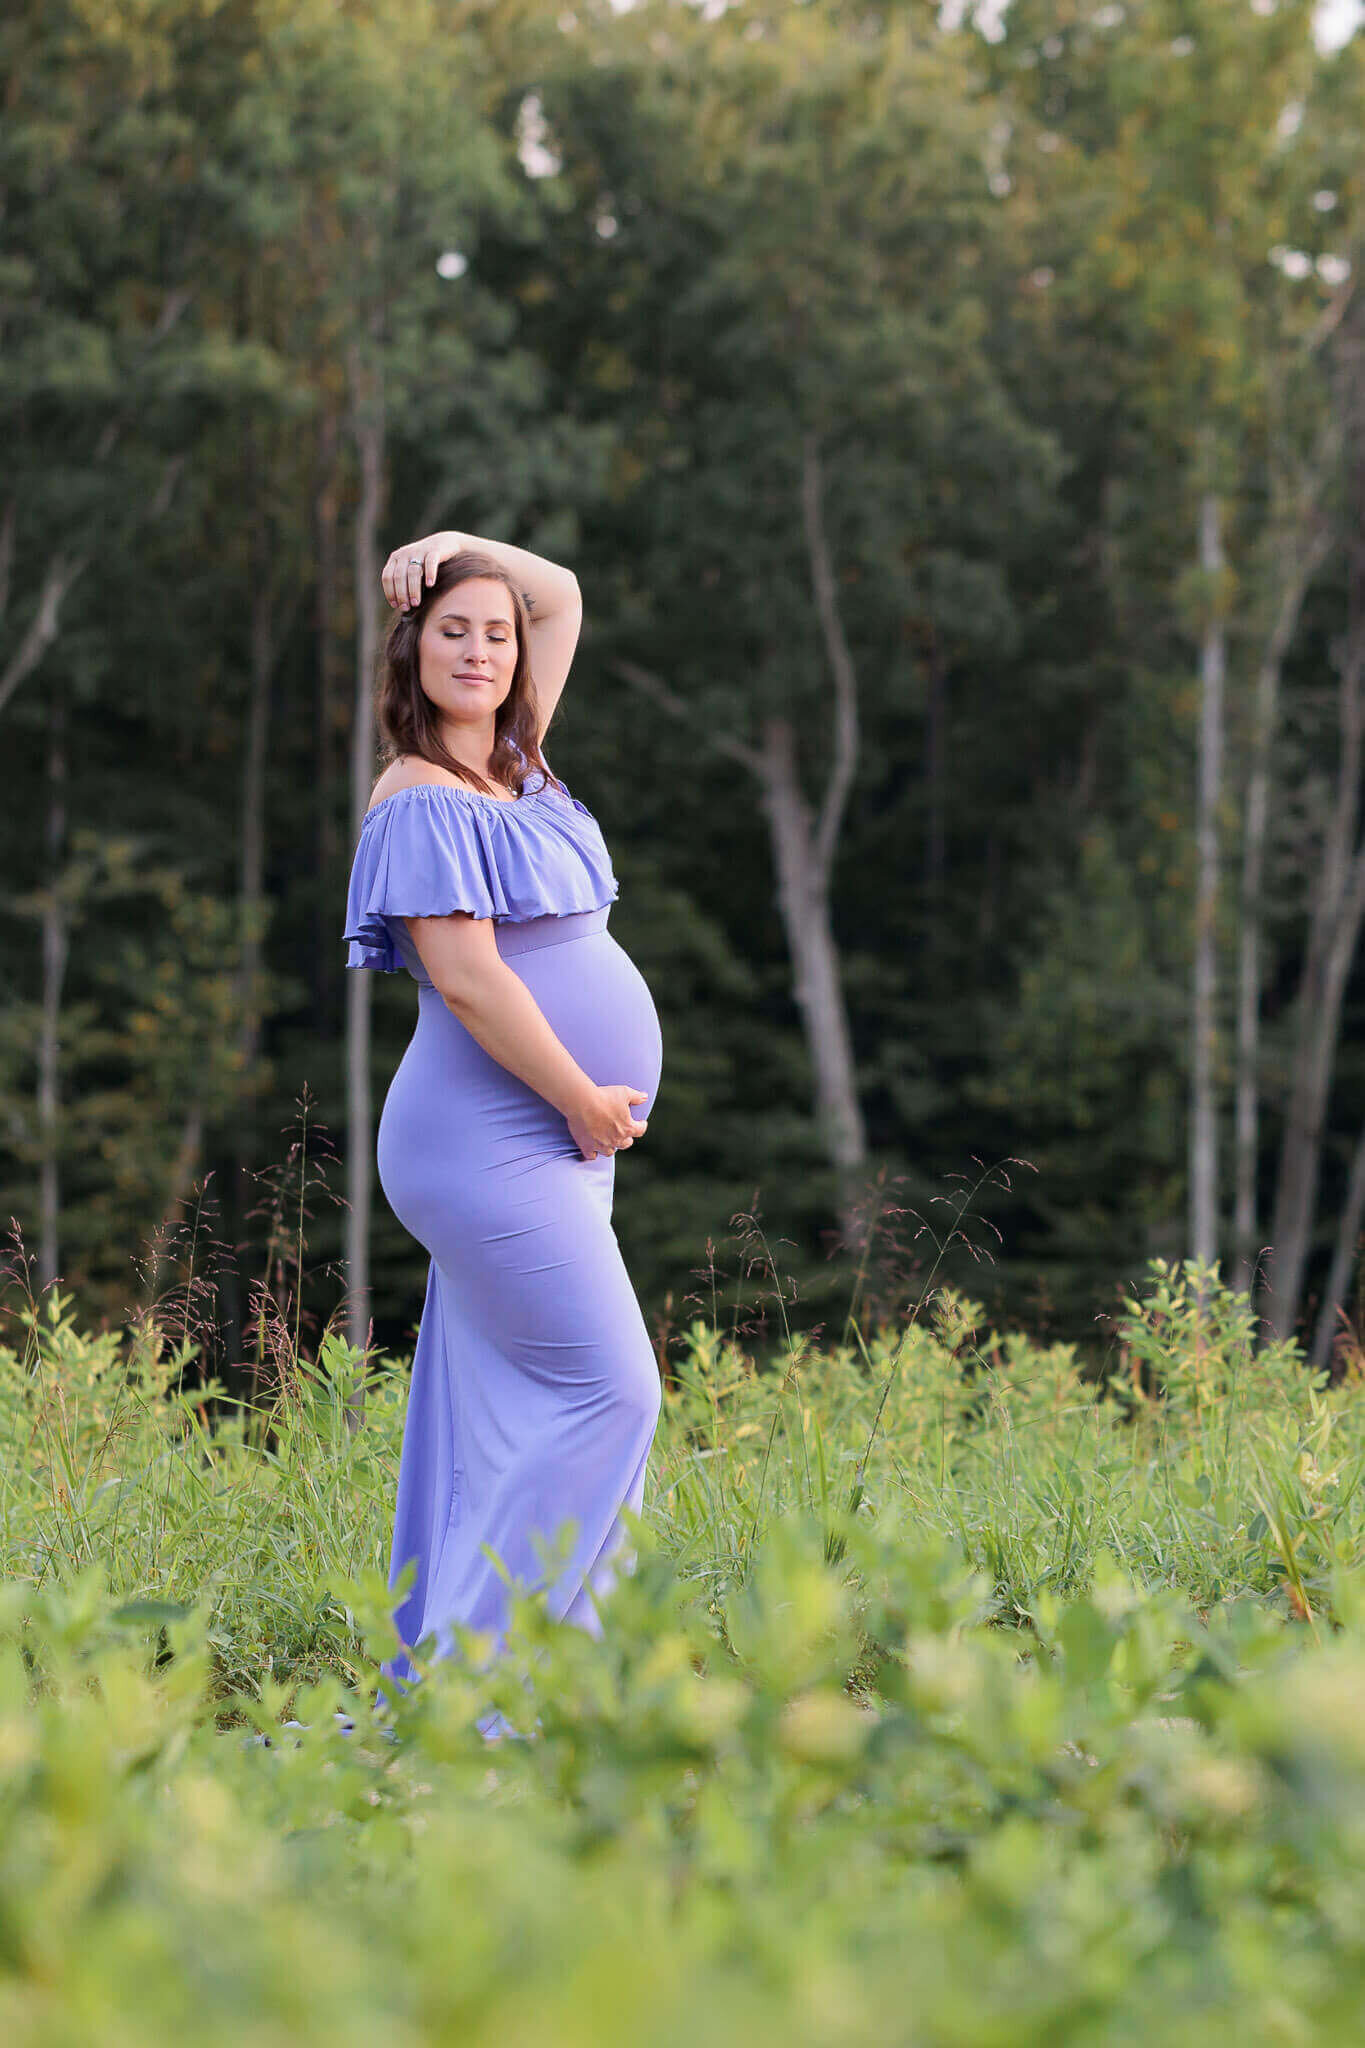 A Fairfax County maternity session of a woman posing in a purple dress.